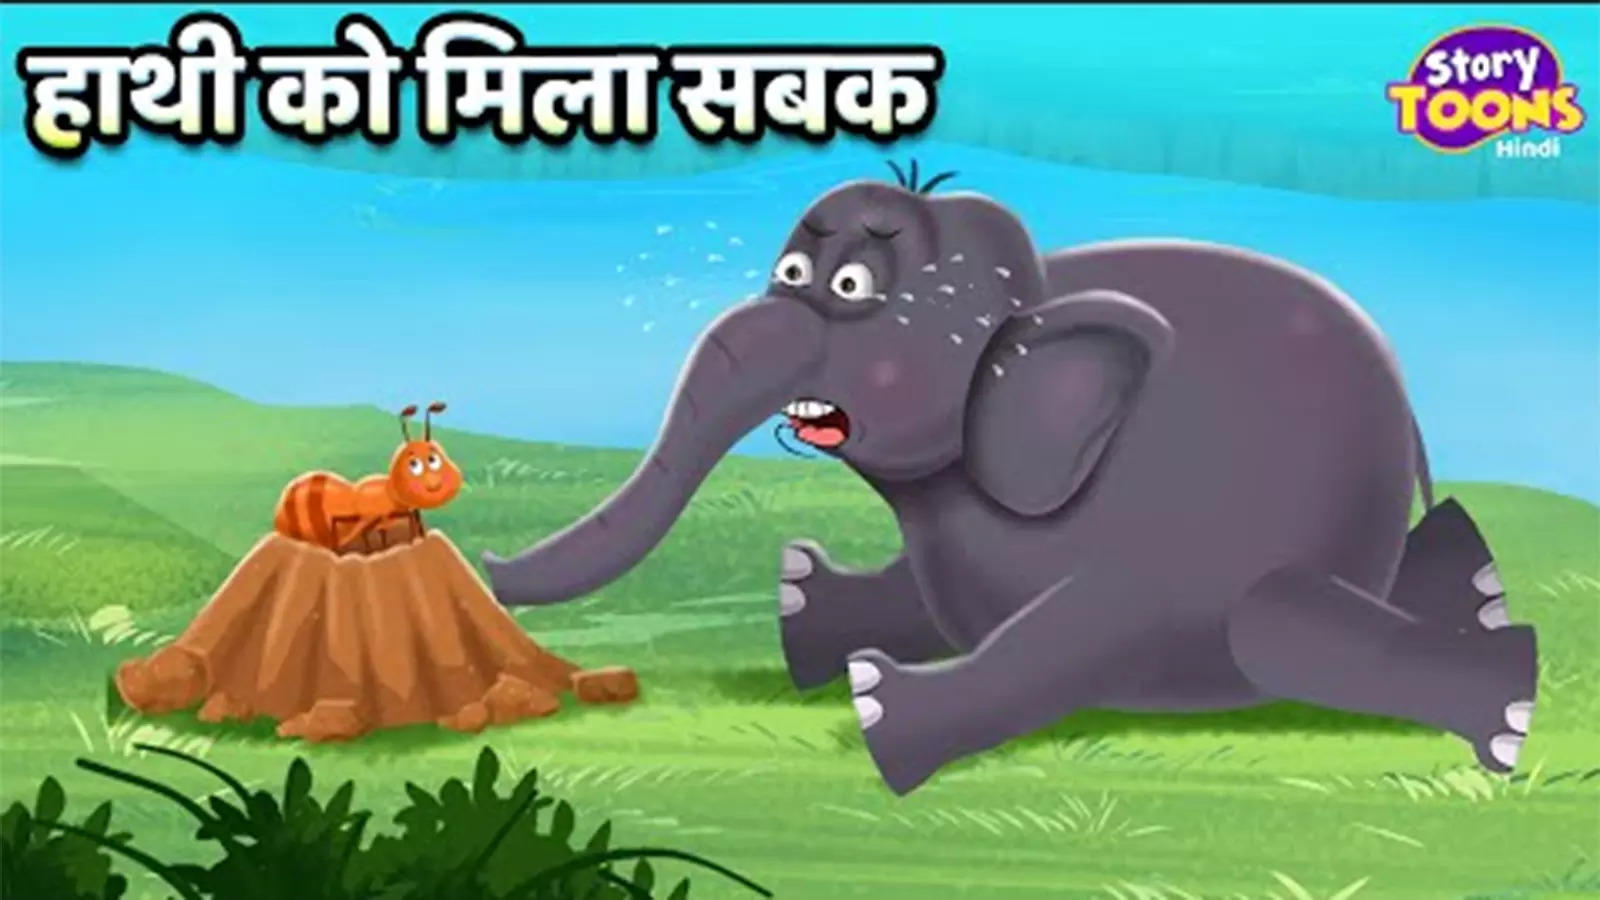 Popular Kids Hindi Story 'The Ant And The Elephant' For Kids - Check Out  Children's Nursery Rhymes, Baby Songs, Fairy Tales And Many More In Hindi |  Entertainment - Times of India Videos